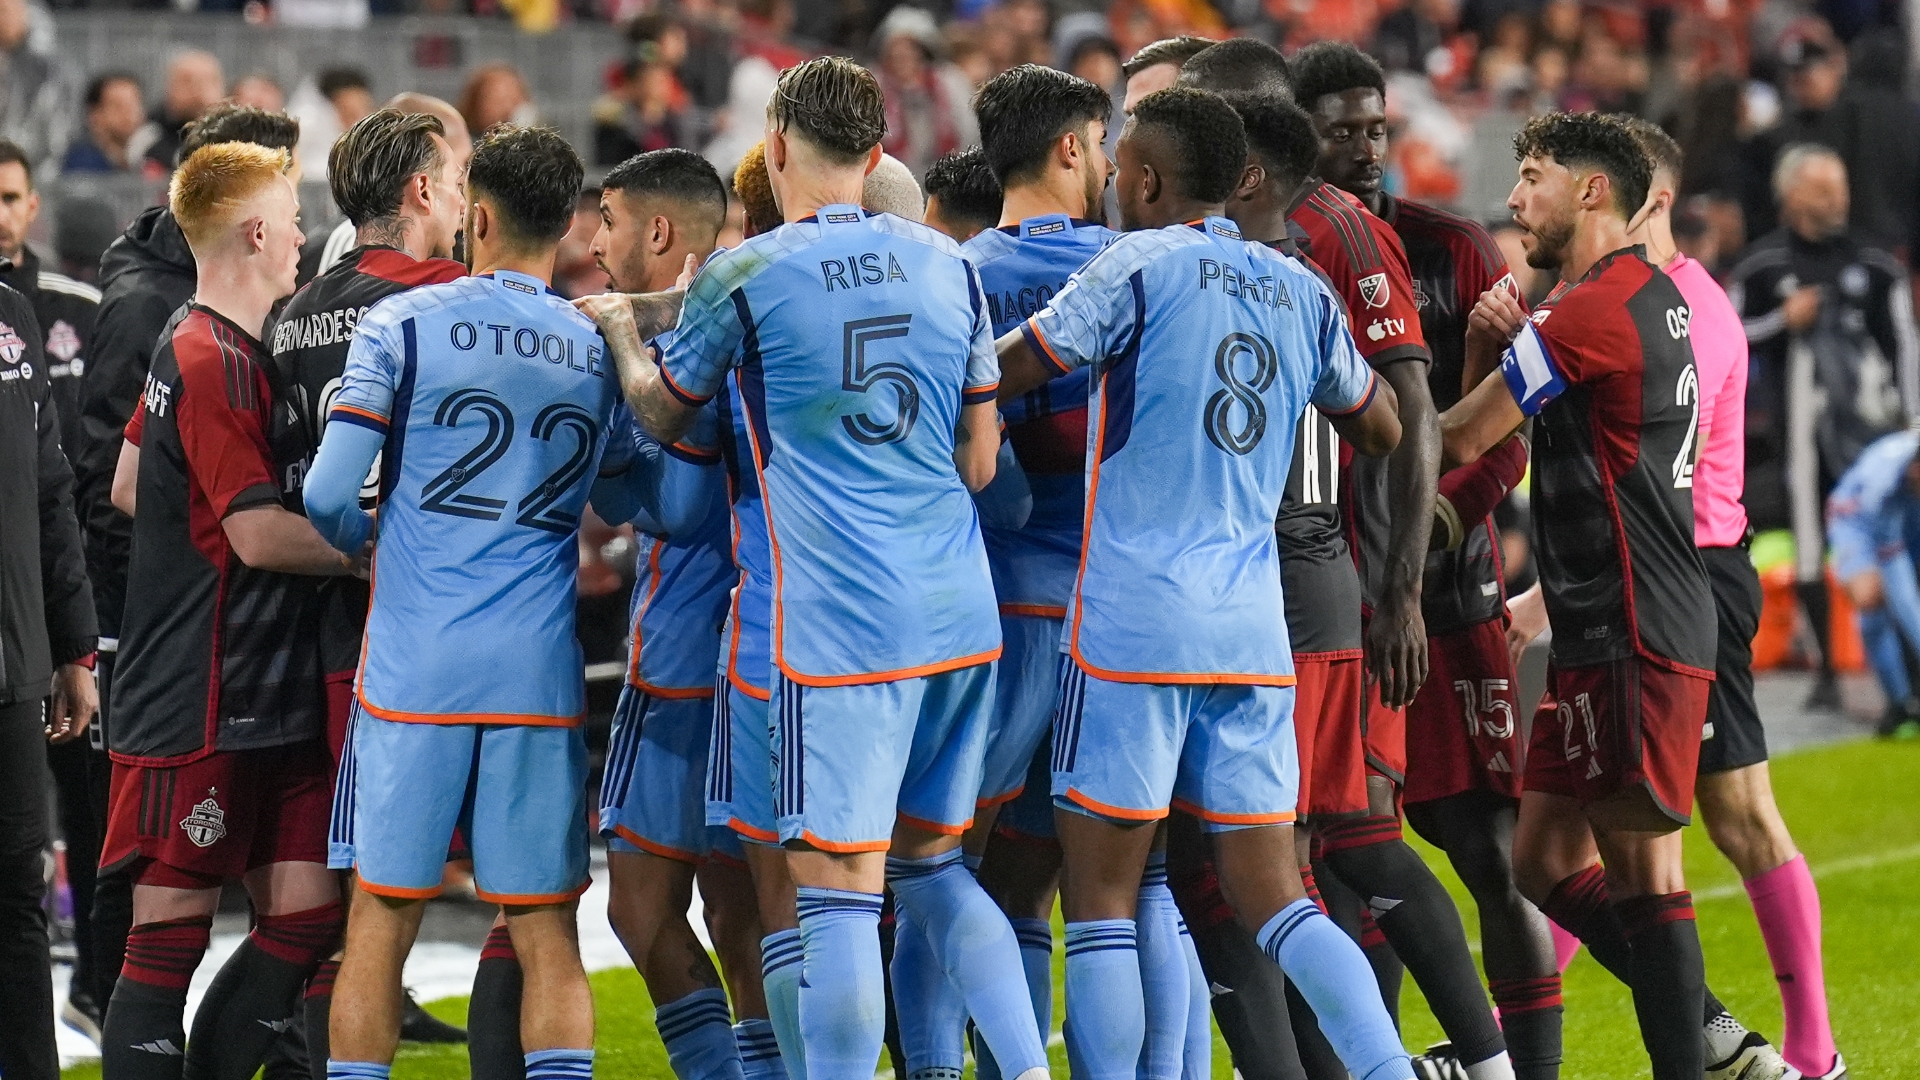 Massive brawl breaks out at end of Toronto FC-NYCFC